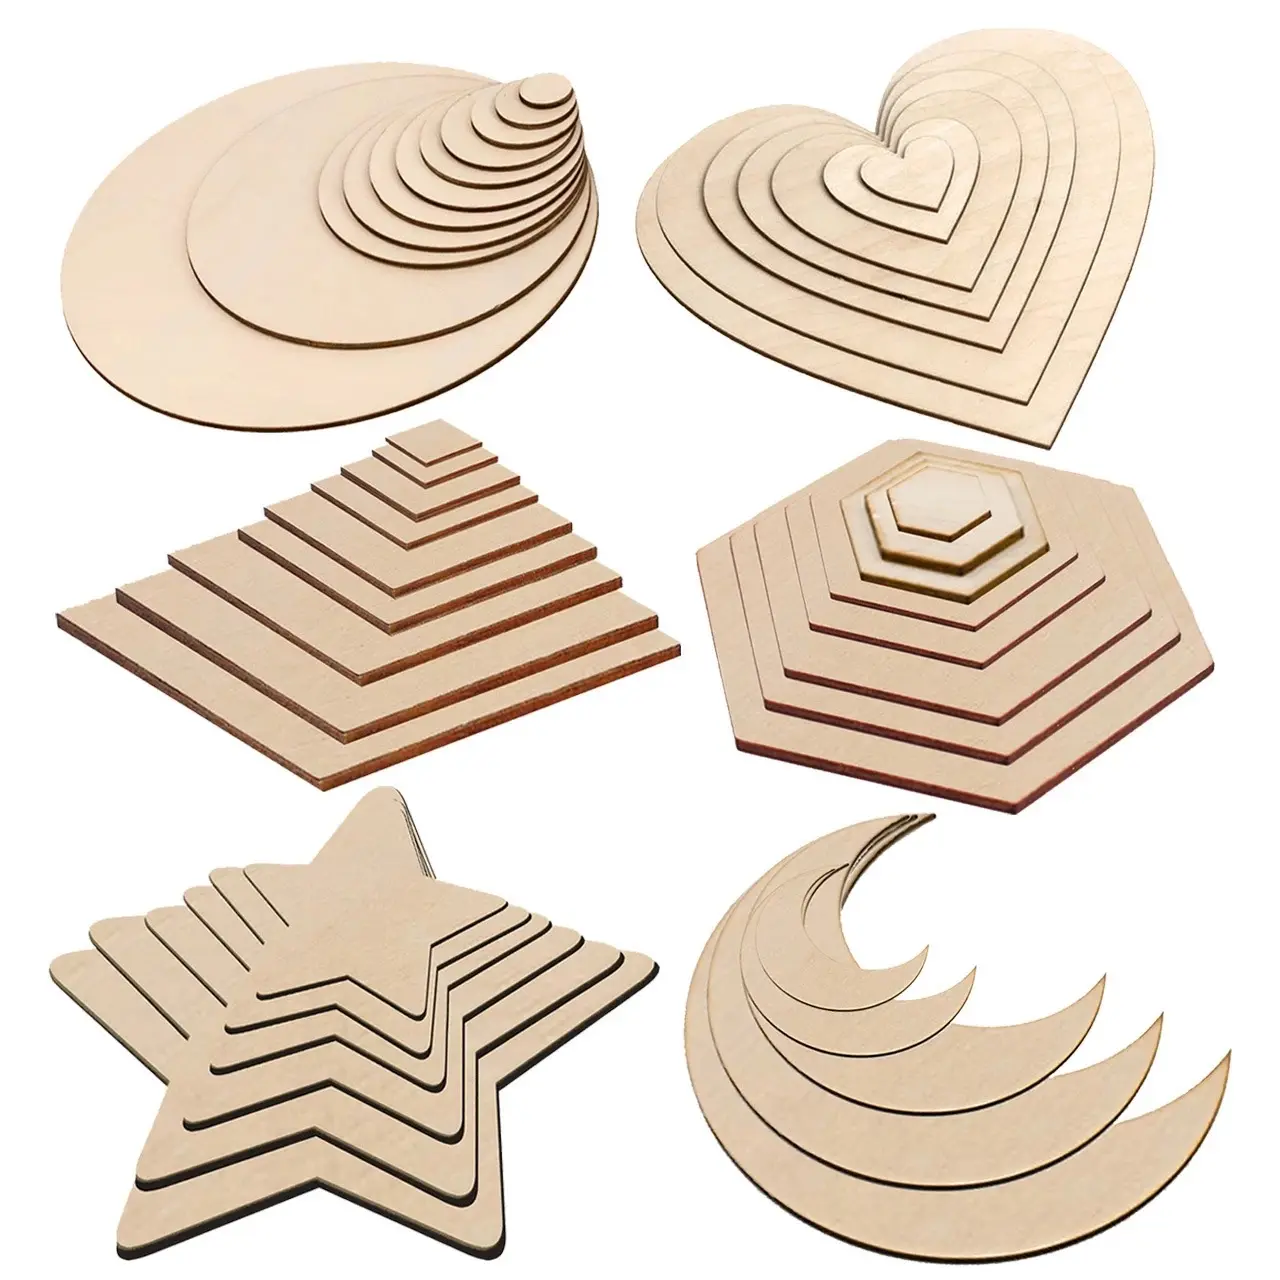 Cheap Wood Burning Pieces 1-40cm Unfinished Wood Blank Round Slices Laser Cutting Wooden Circles For Craft DIY